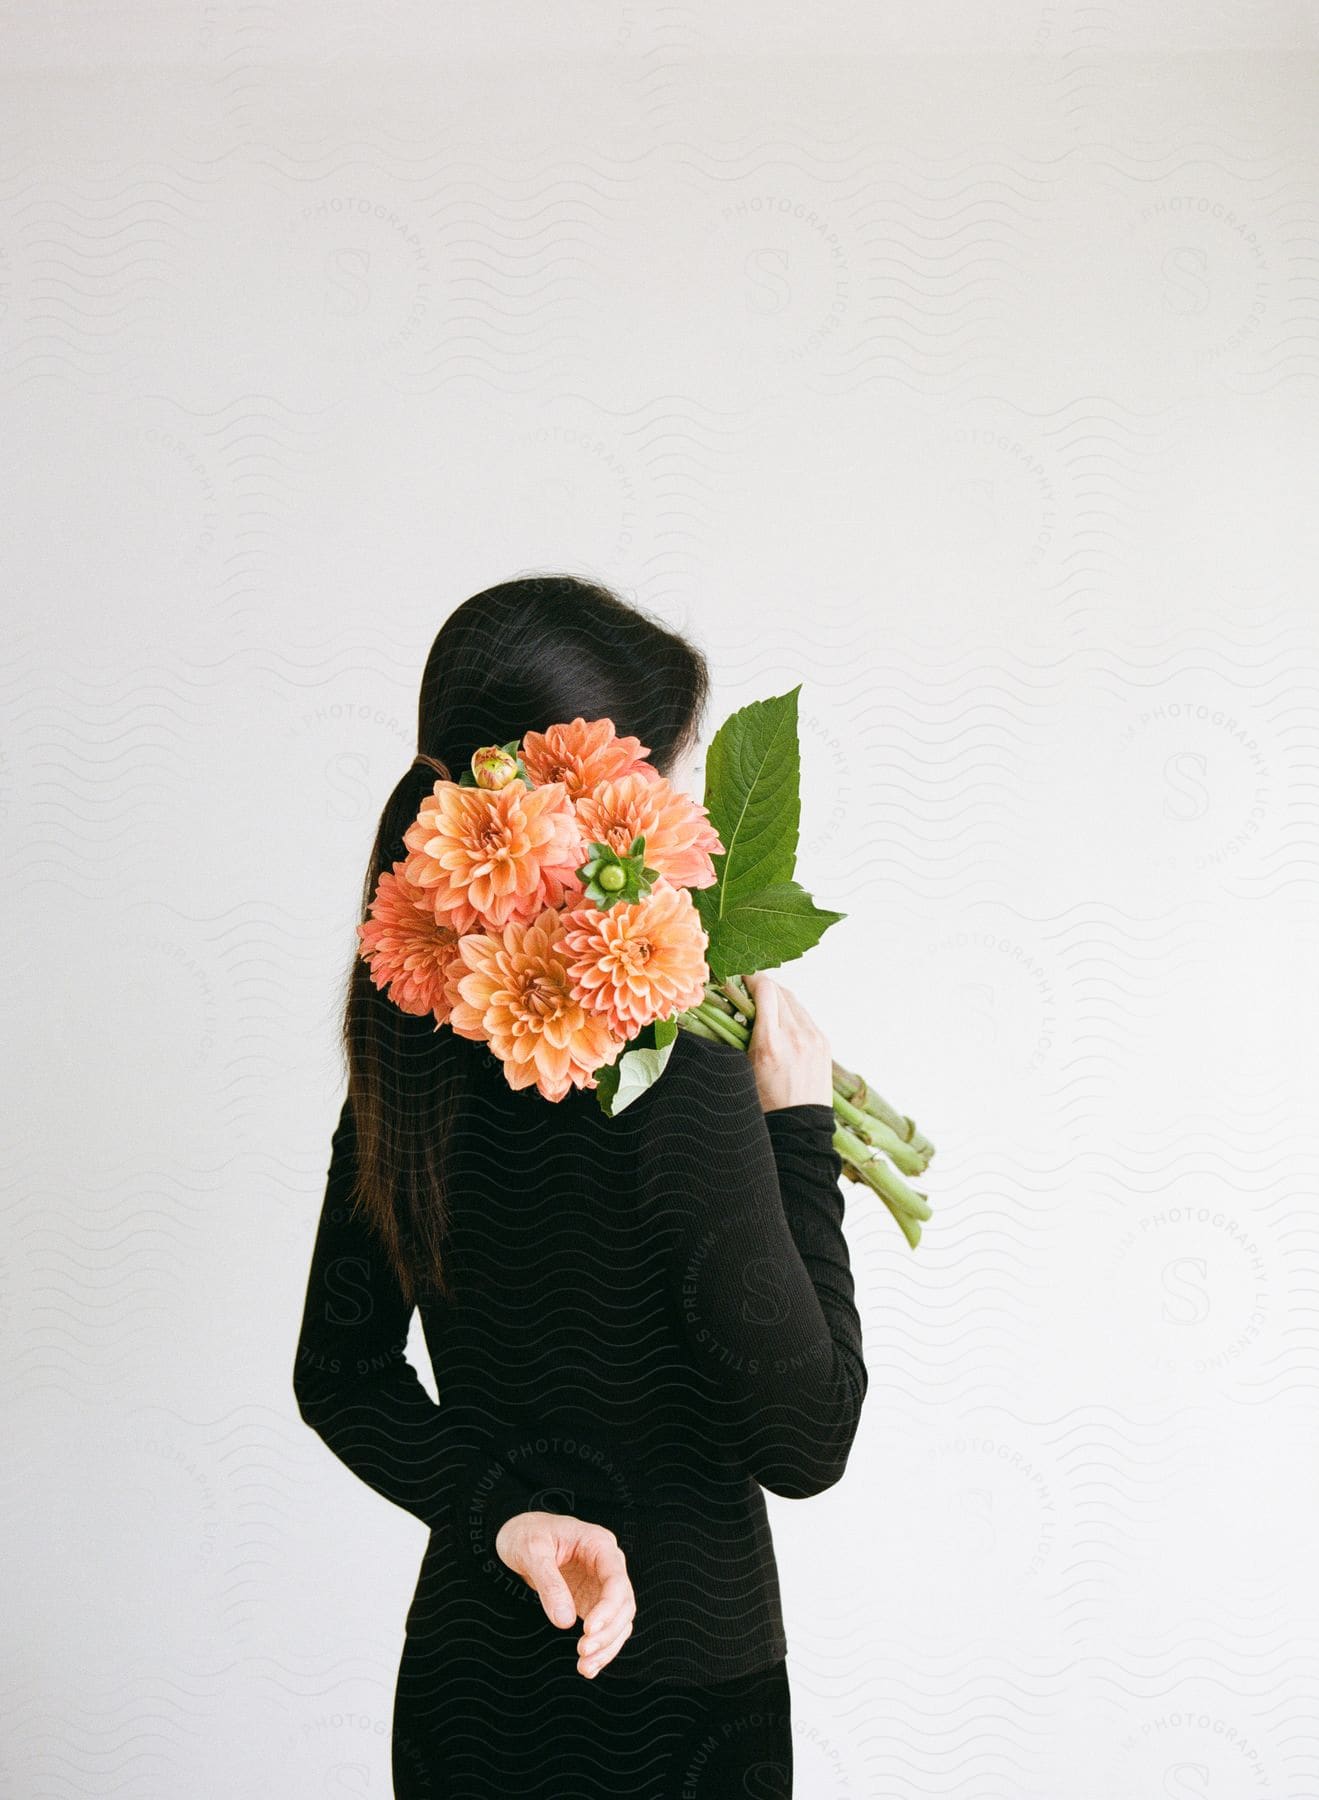 A woman dressed in black, with one hand behind her back and a flower bouquet over her shoulder.